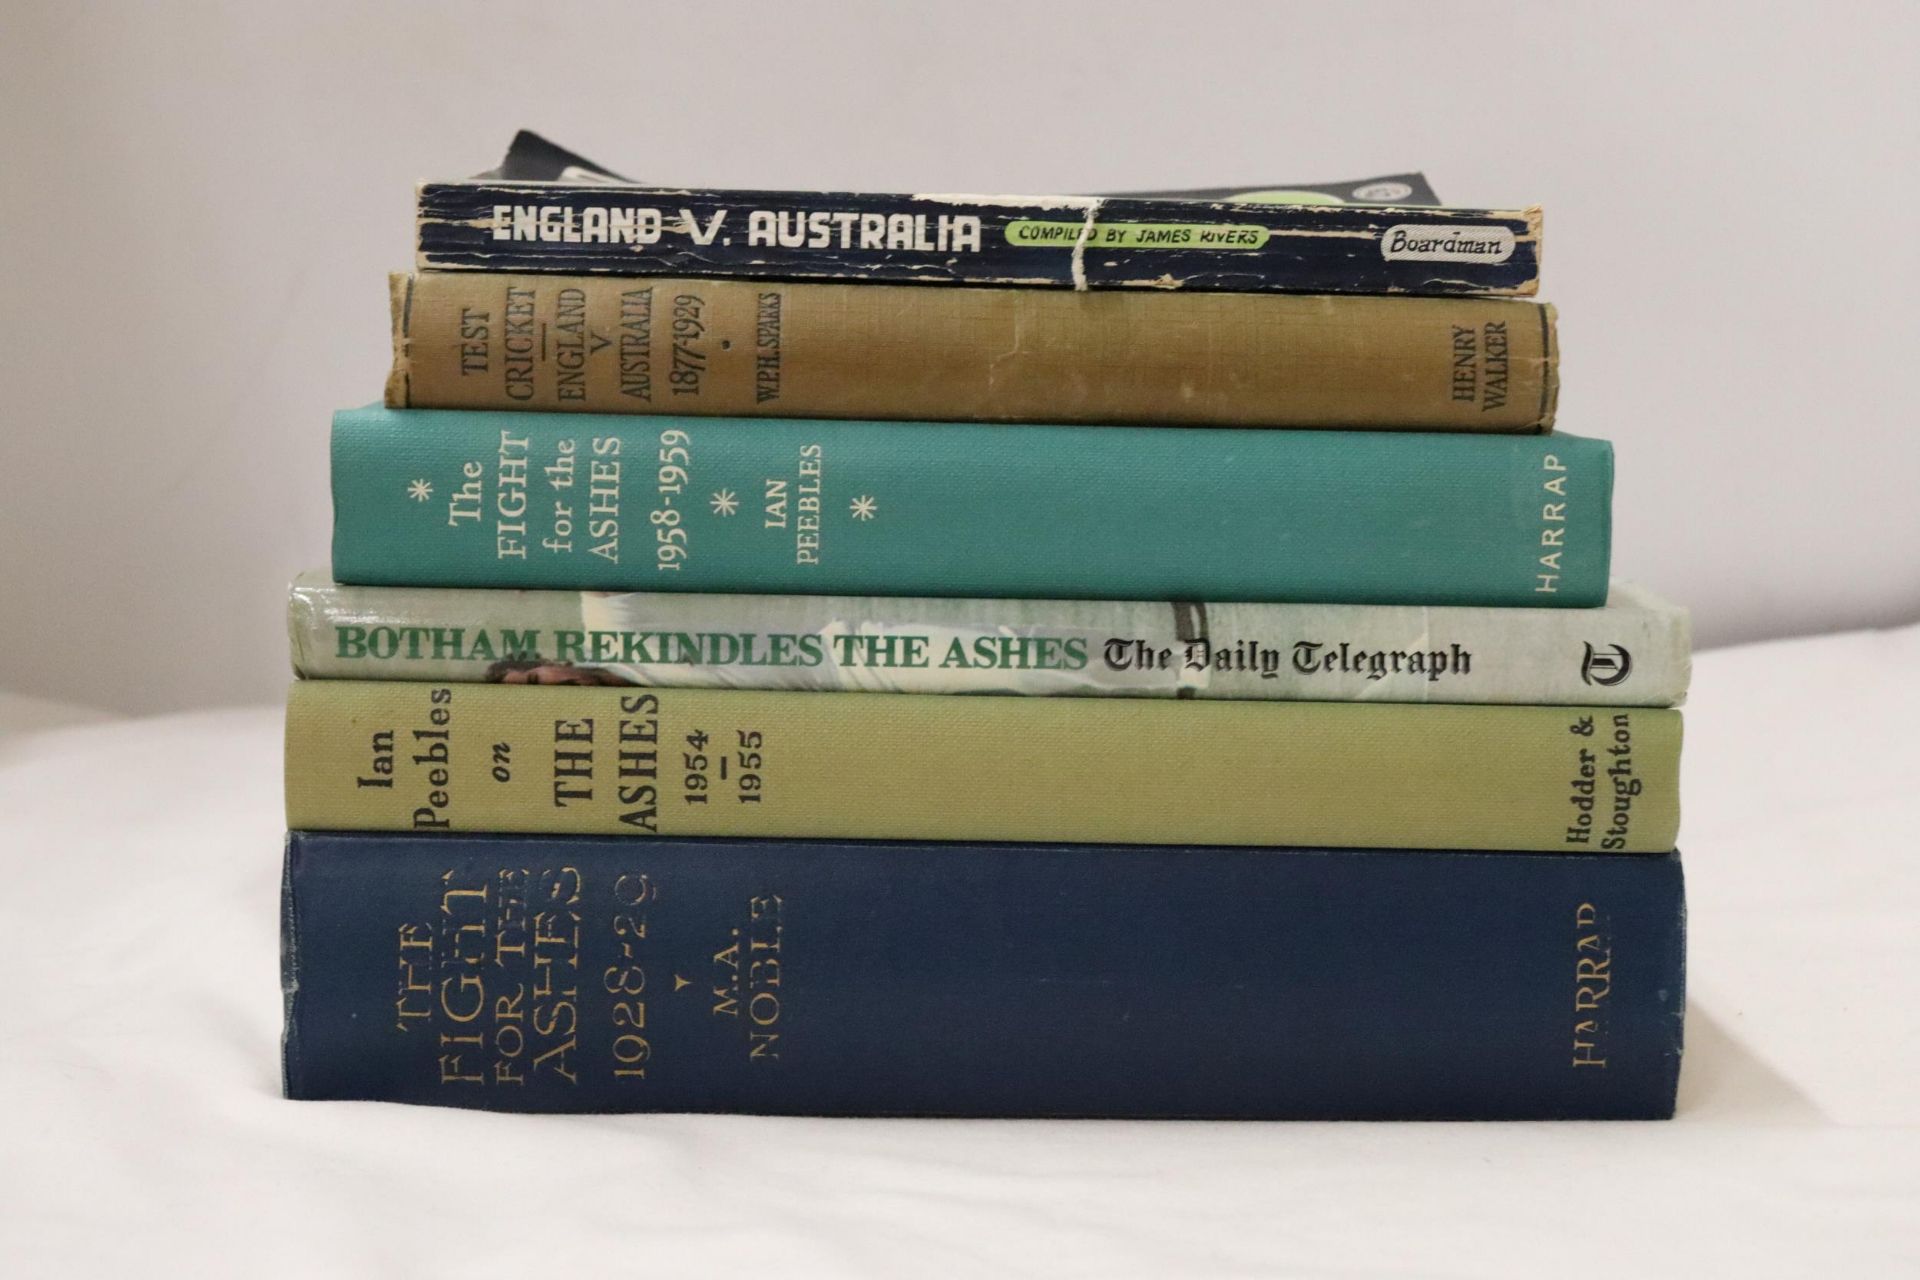 SIX ENGLAND V AUSTRALIA 'ASHES' THEMED BOOKS TO INCLUDE, THE FIGHT FOR THE ASHES, 1928-29, BOTHAM - Bild 2 aus 3